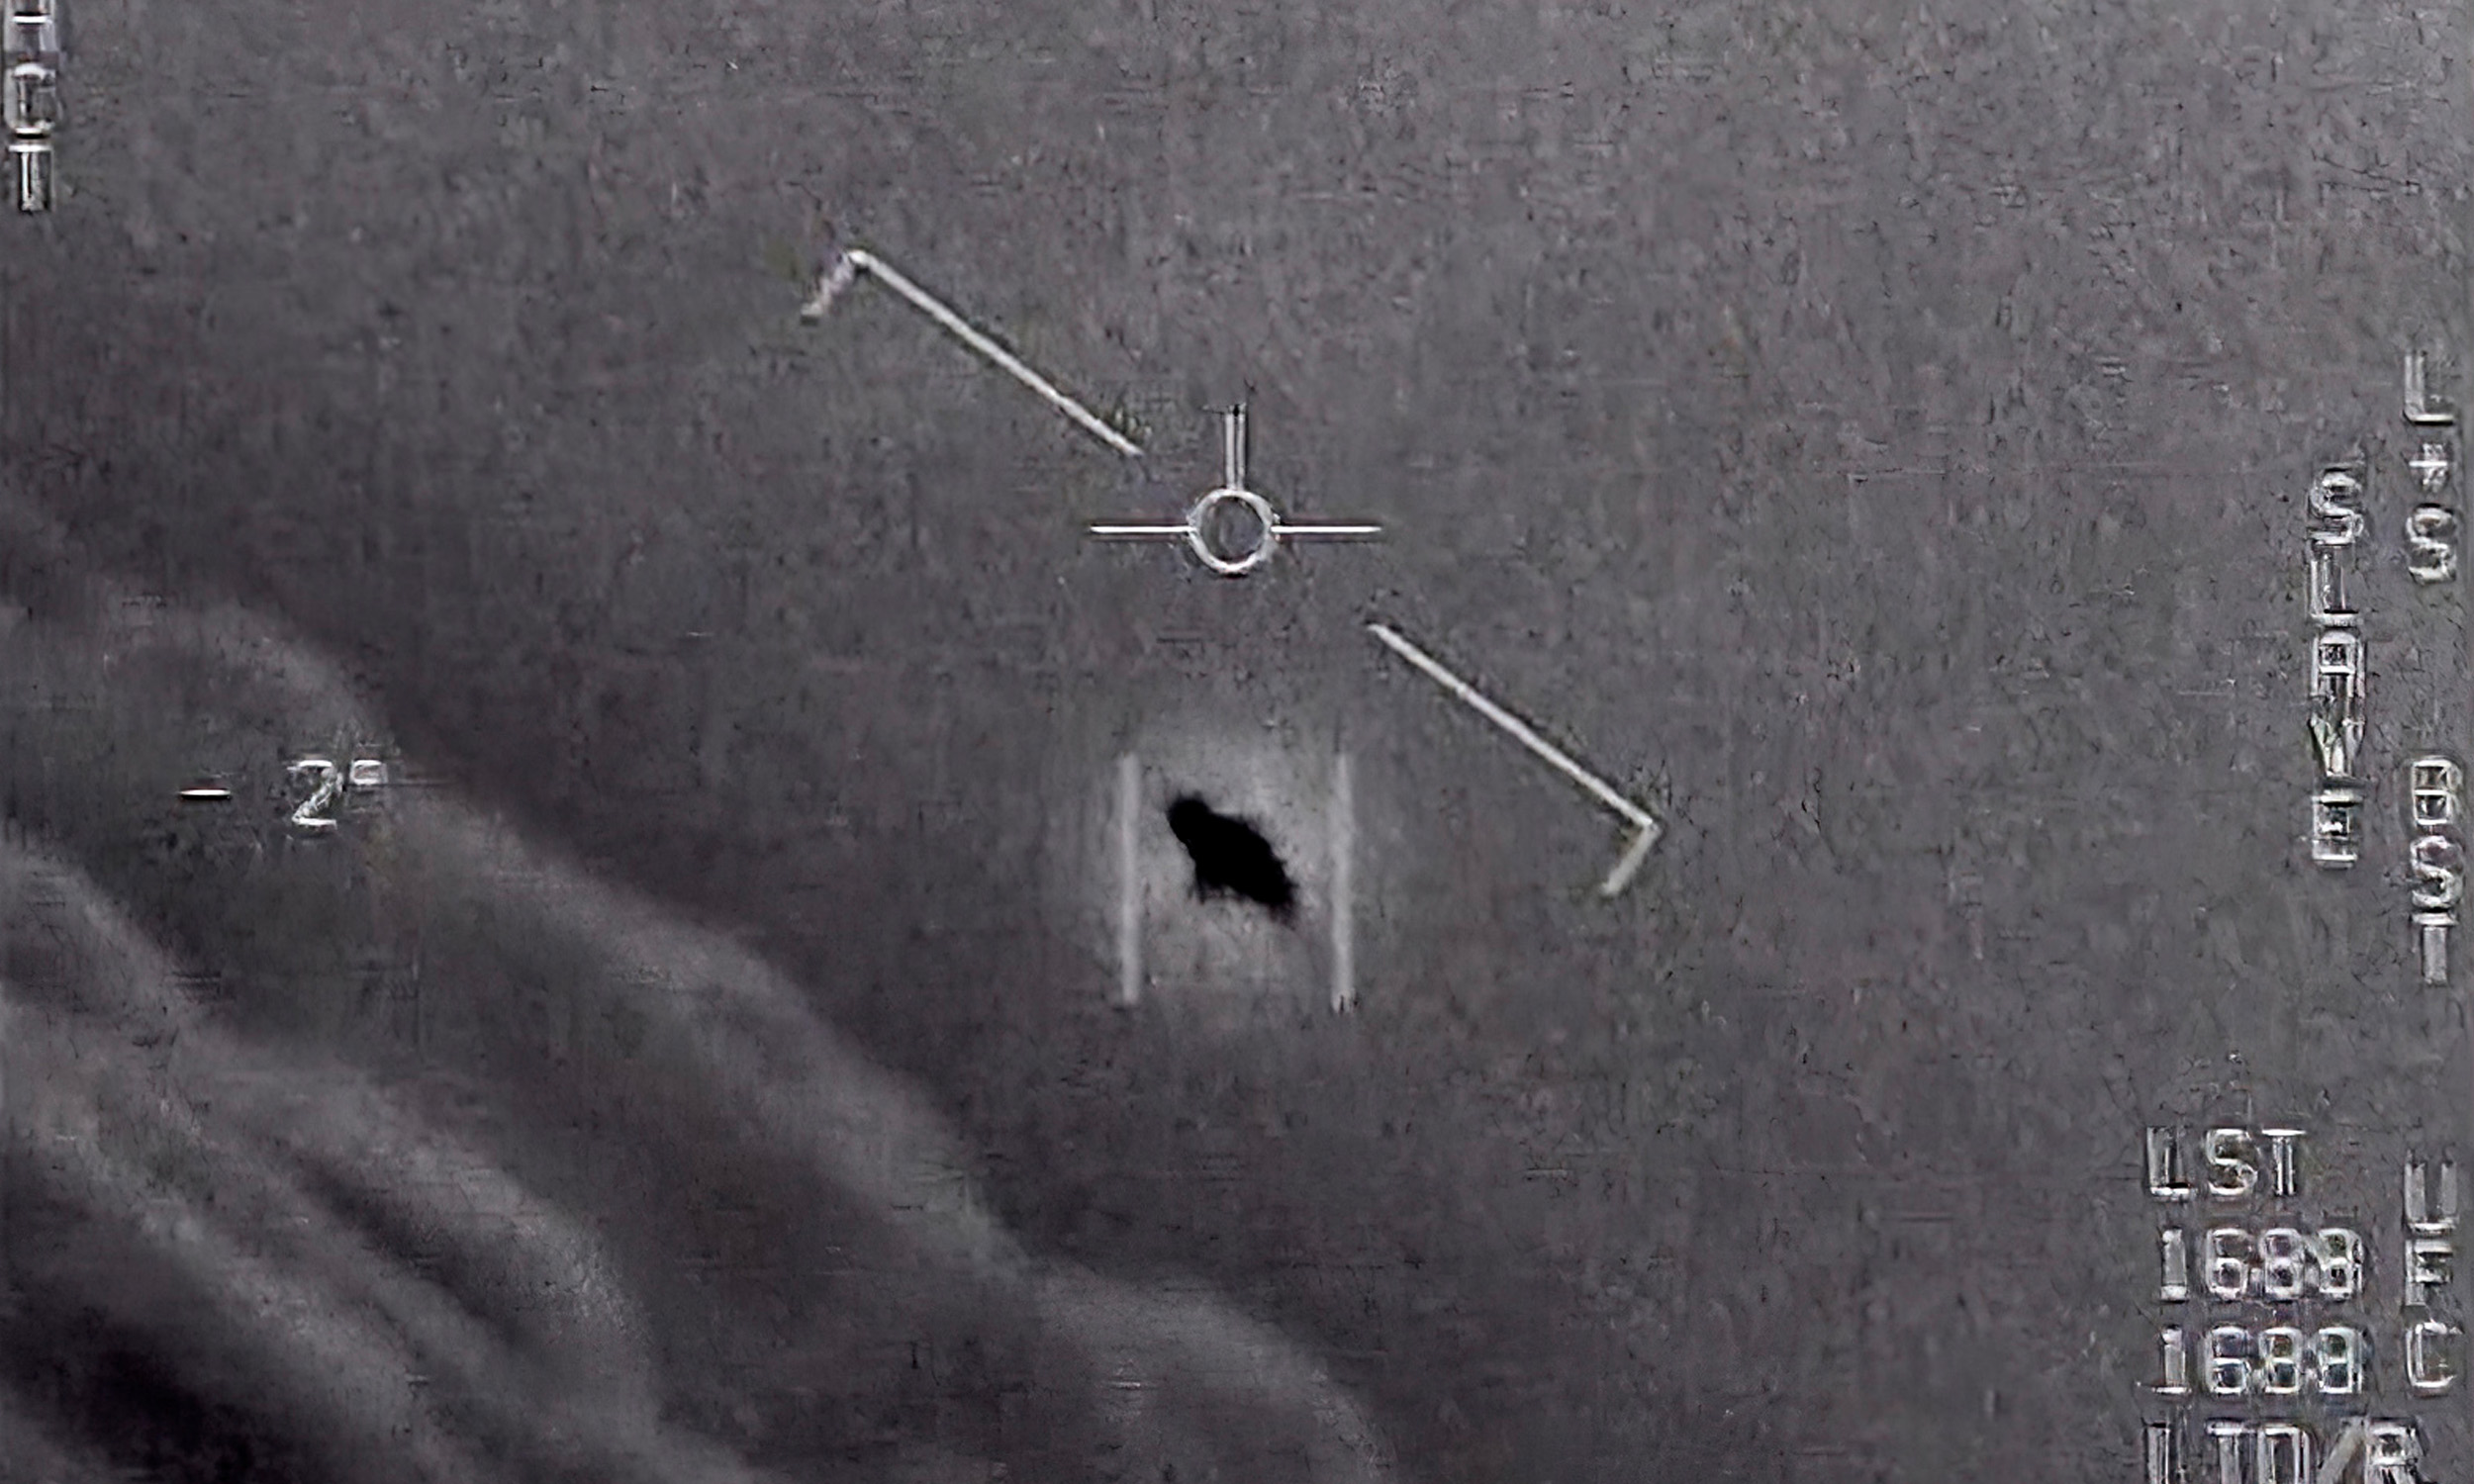 Pentagon Received 366 UFO Sighting Reports